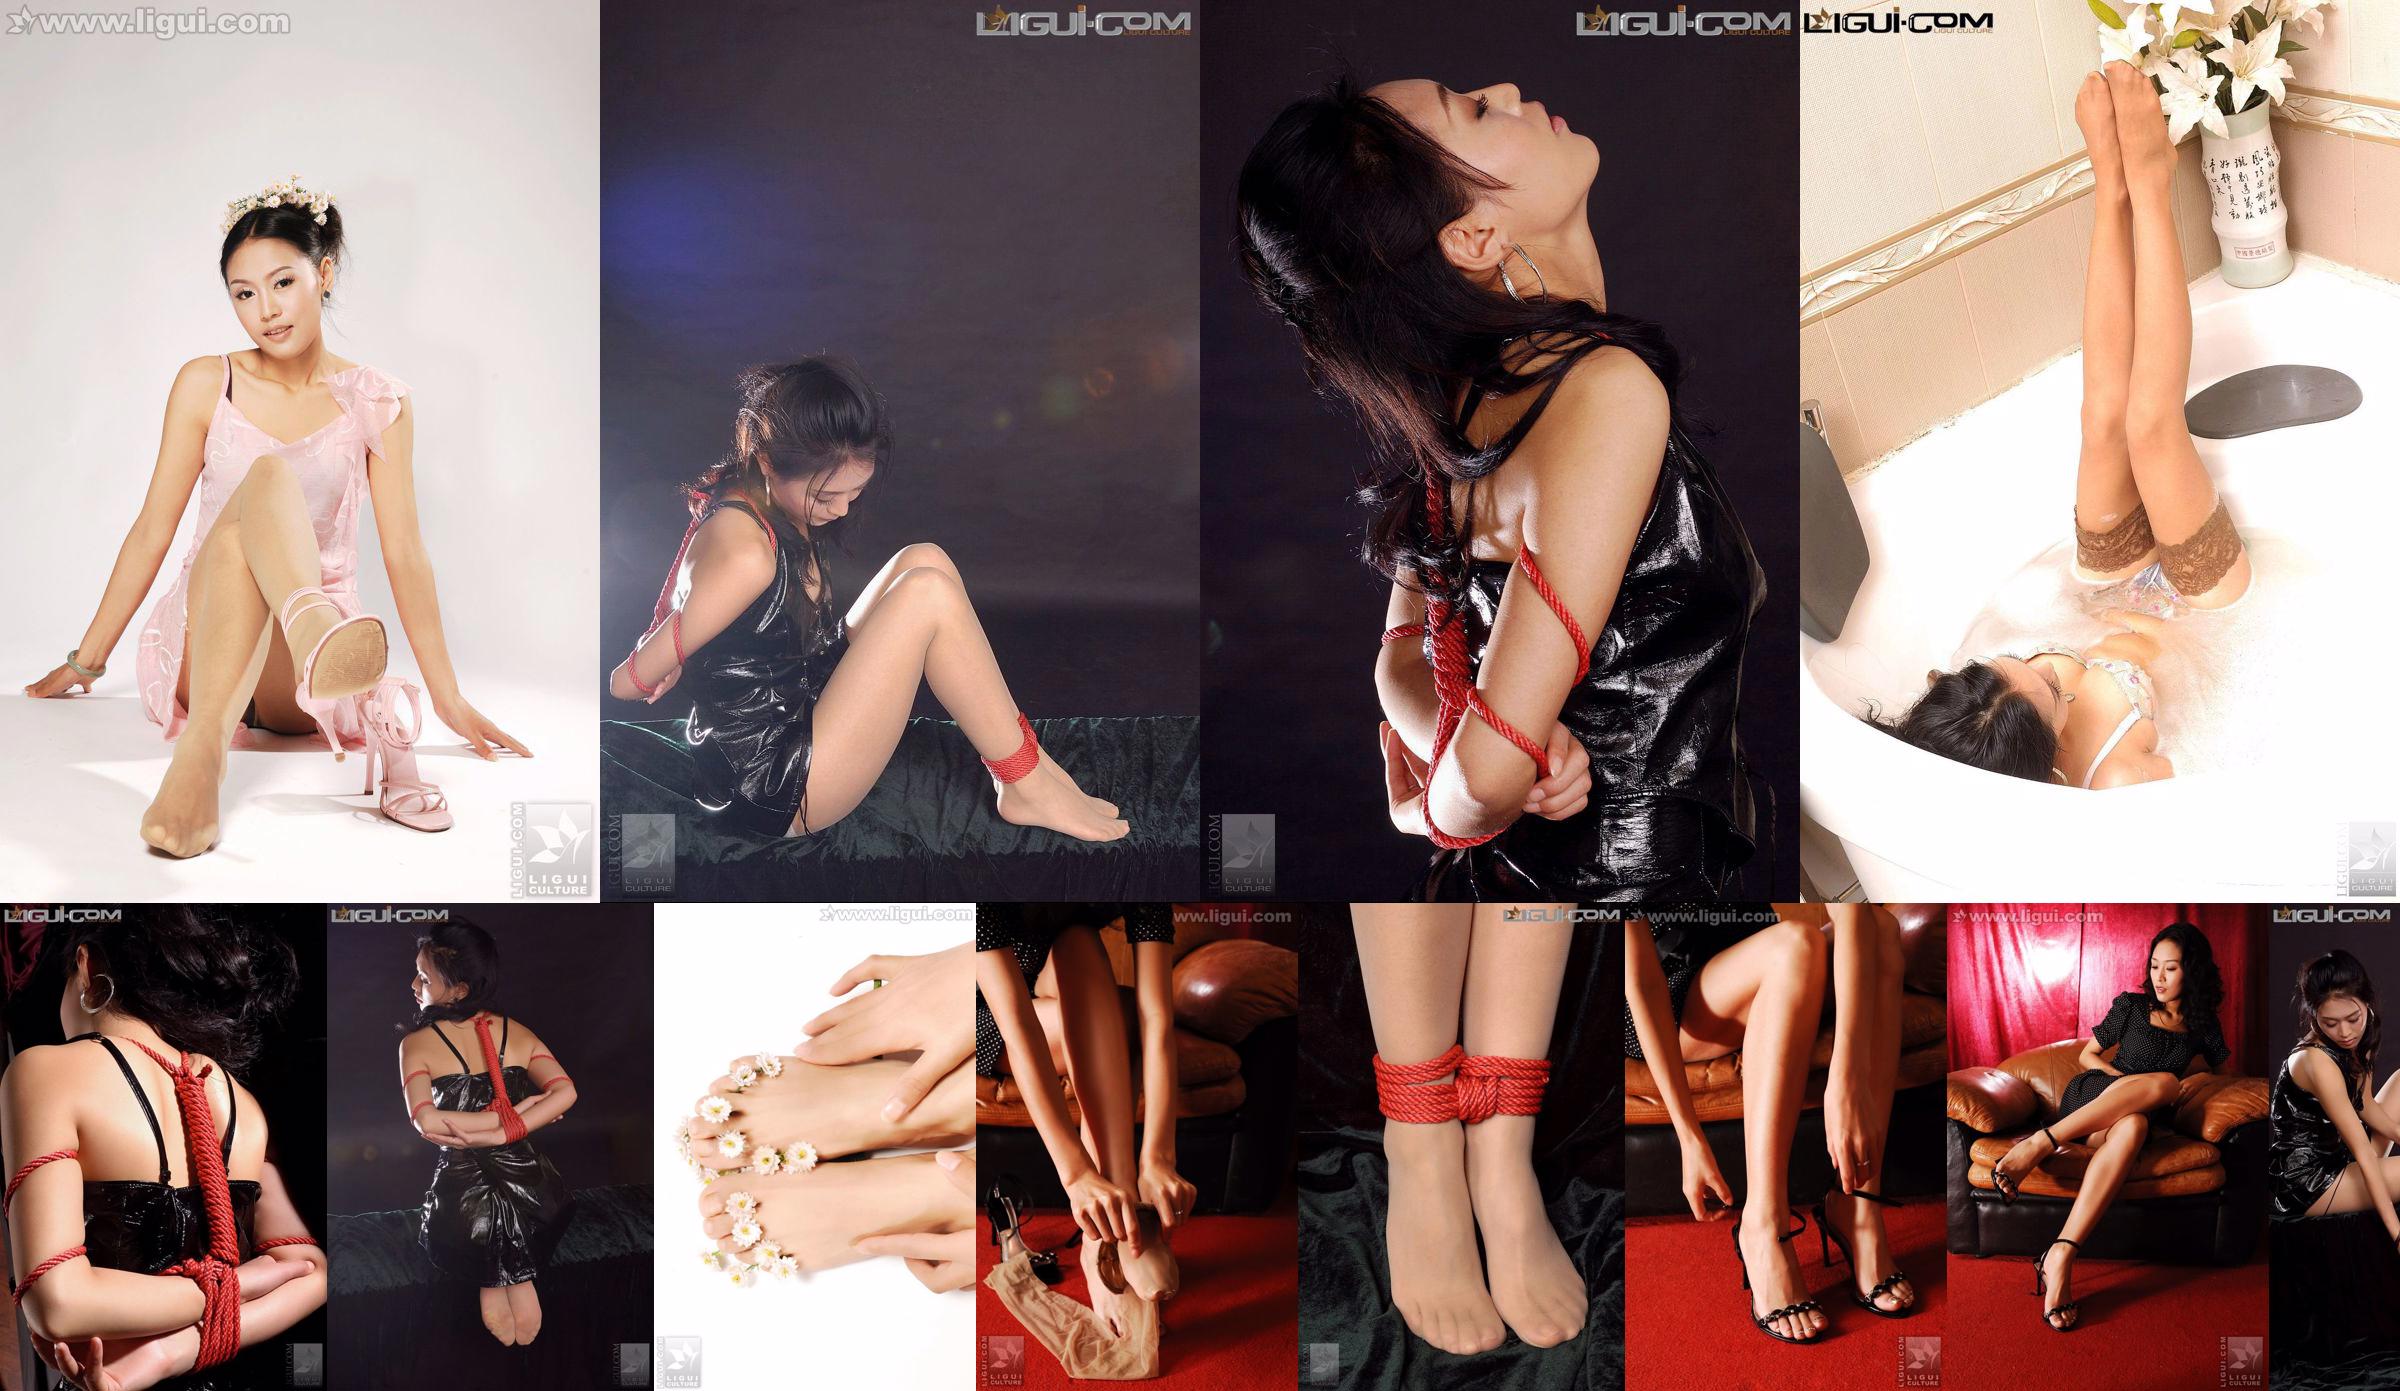 Model Kaimi "Golden Powder Aristocratic High Heels" [Ligui LiGui] Stockings and Jade Foot Photo Picture No.73acde Page 15